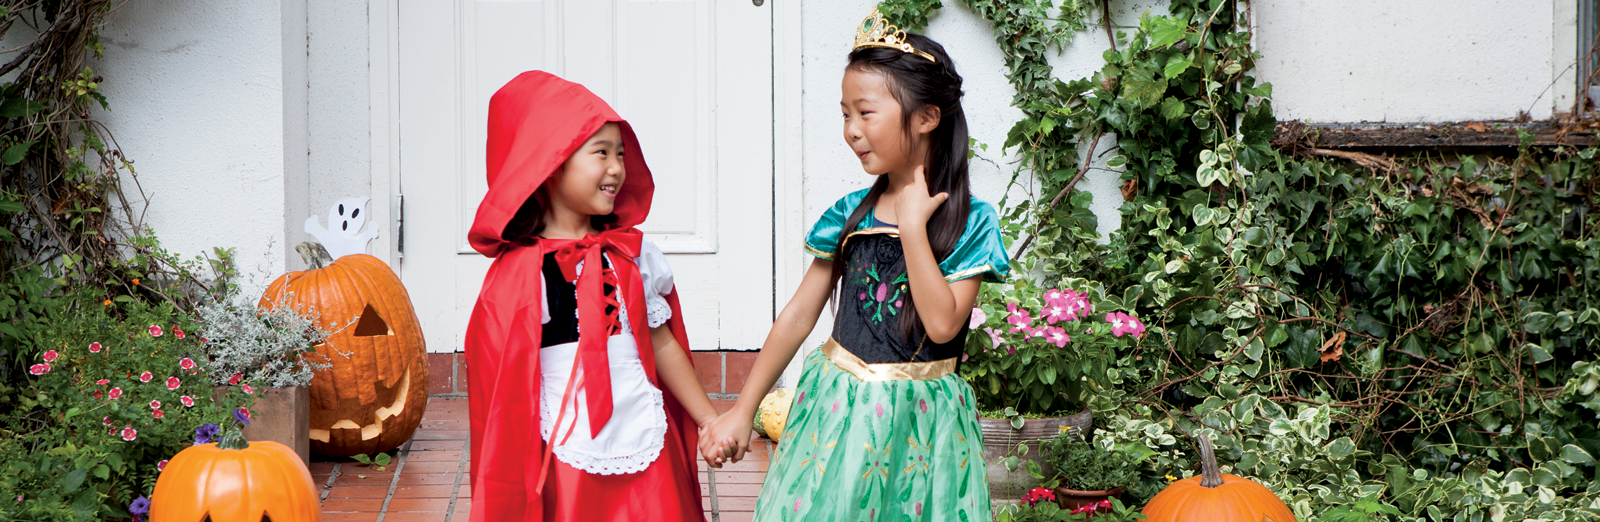 young-girls-in-halloween-costumes-1600x522.png